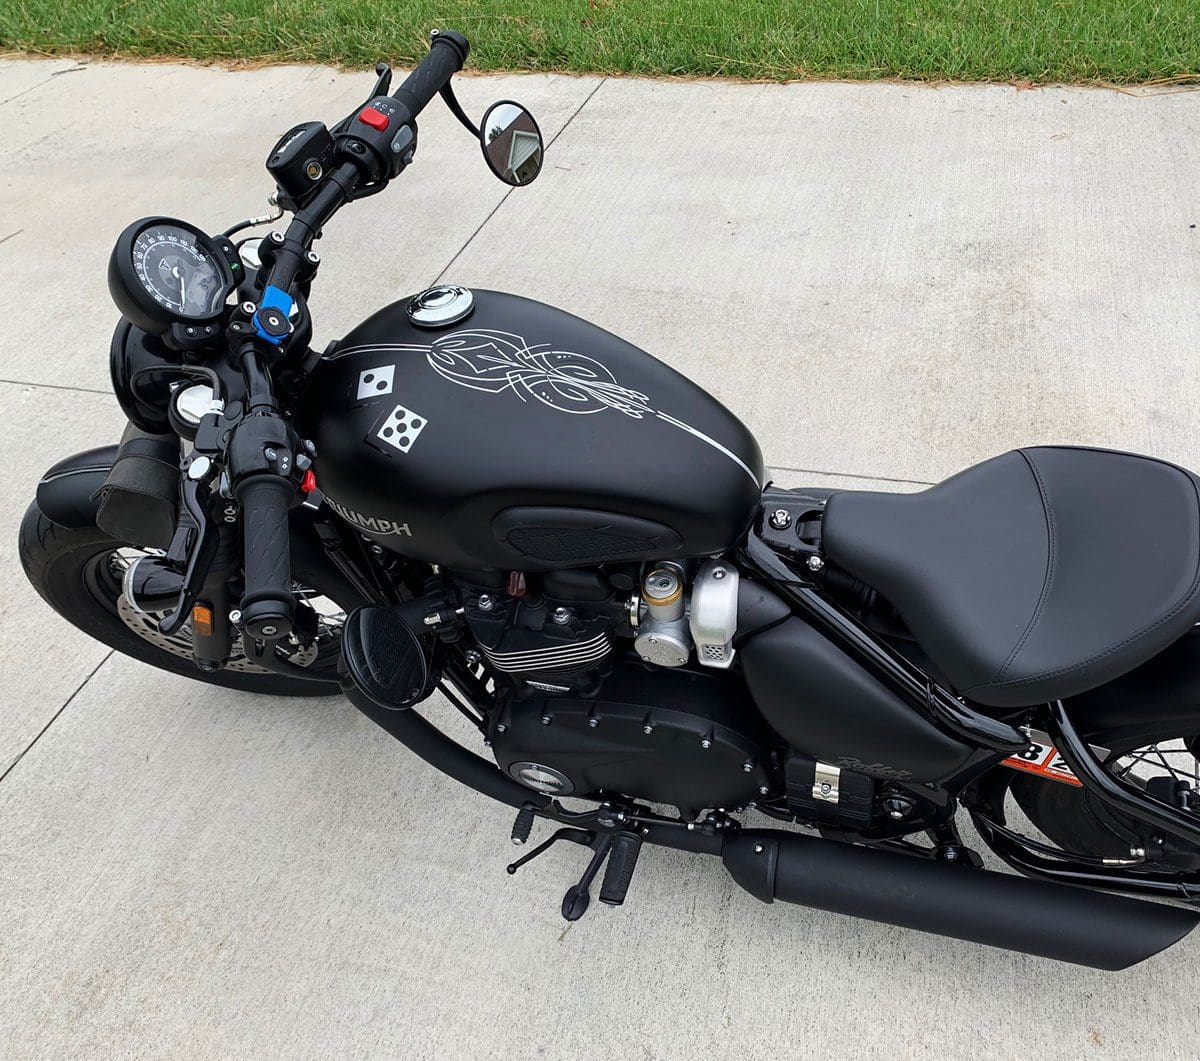 A black motorcycle parked on the side of a road.